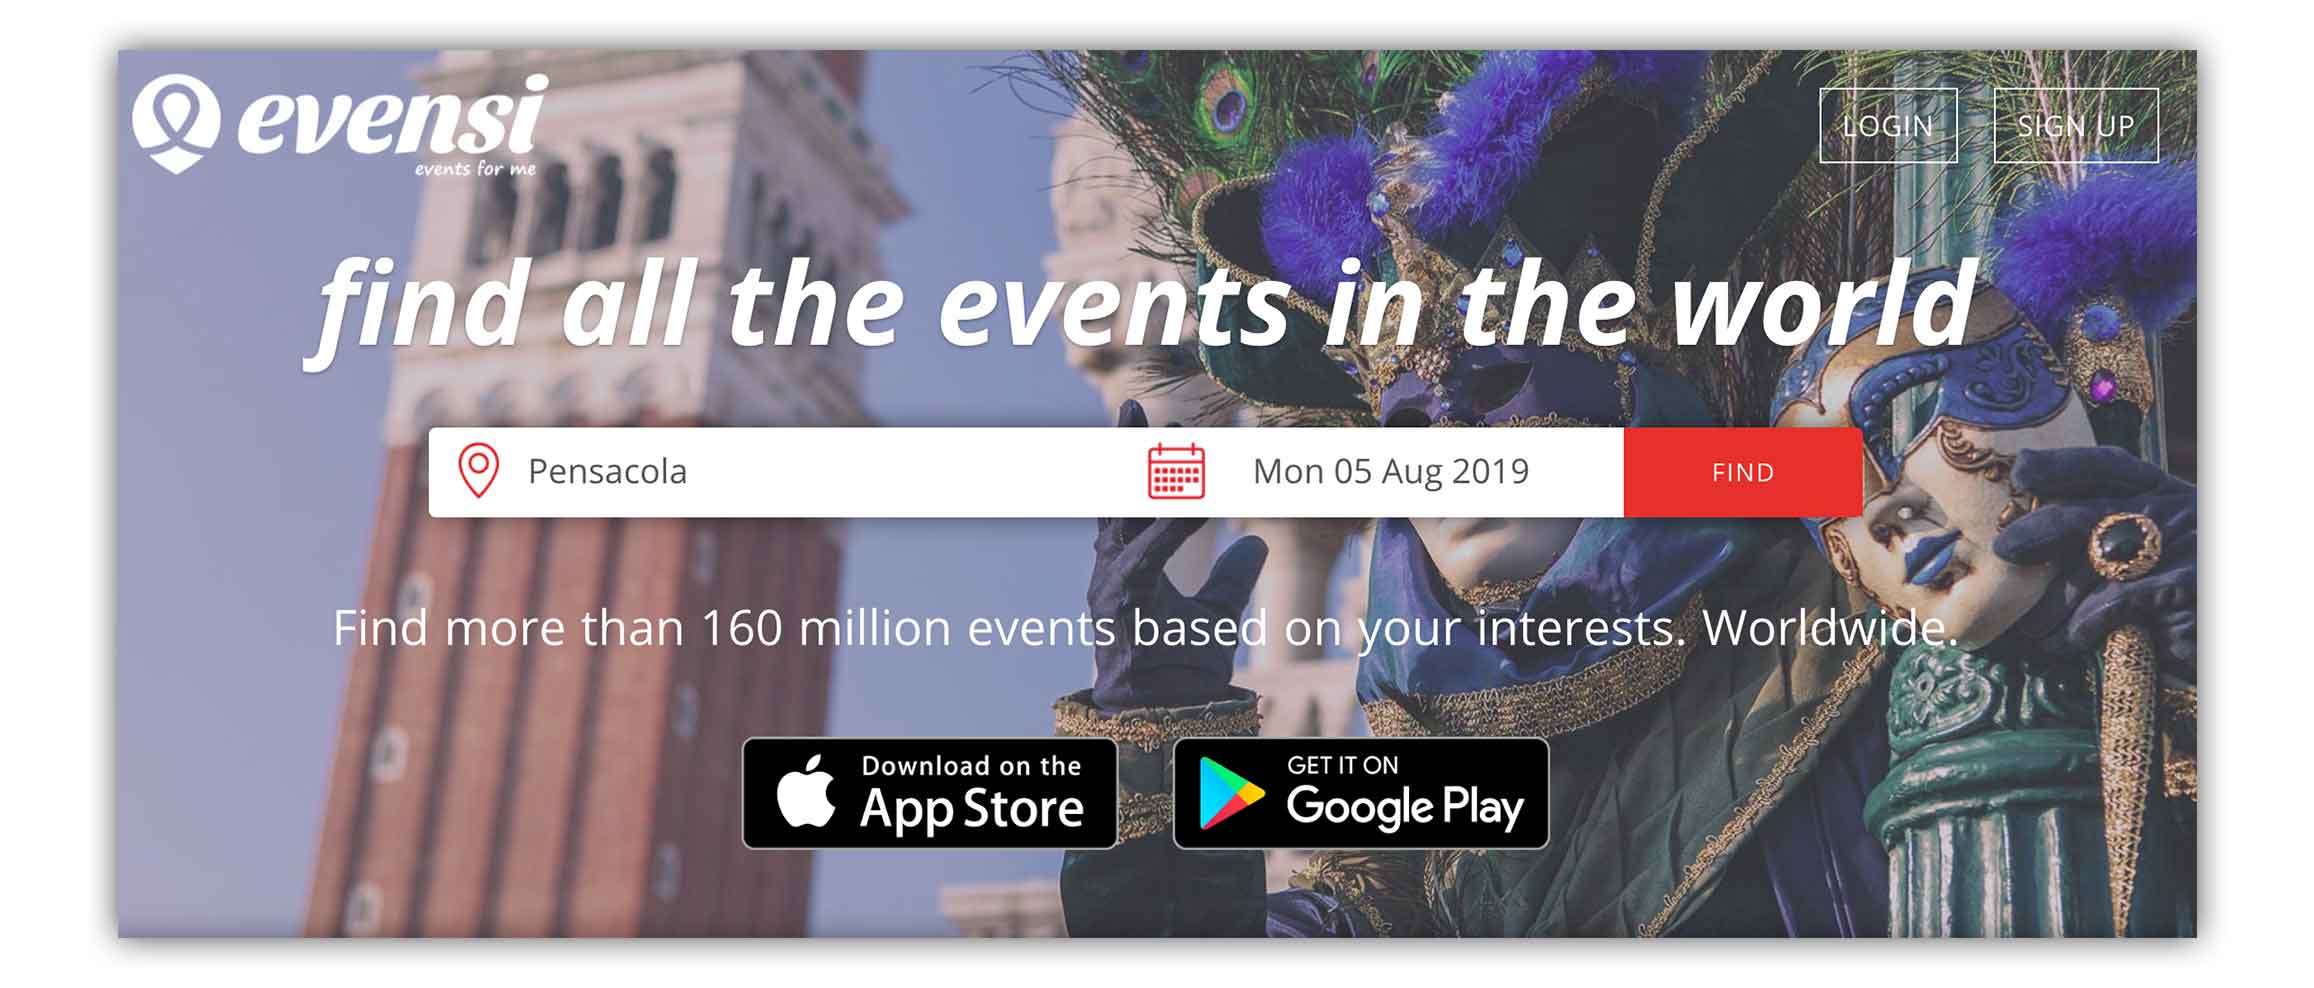 evensi-for-events